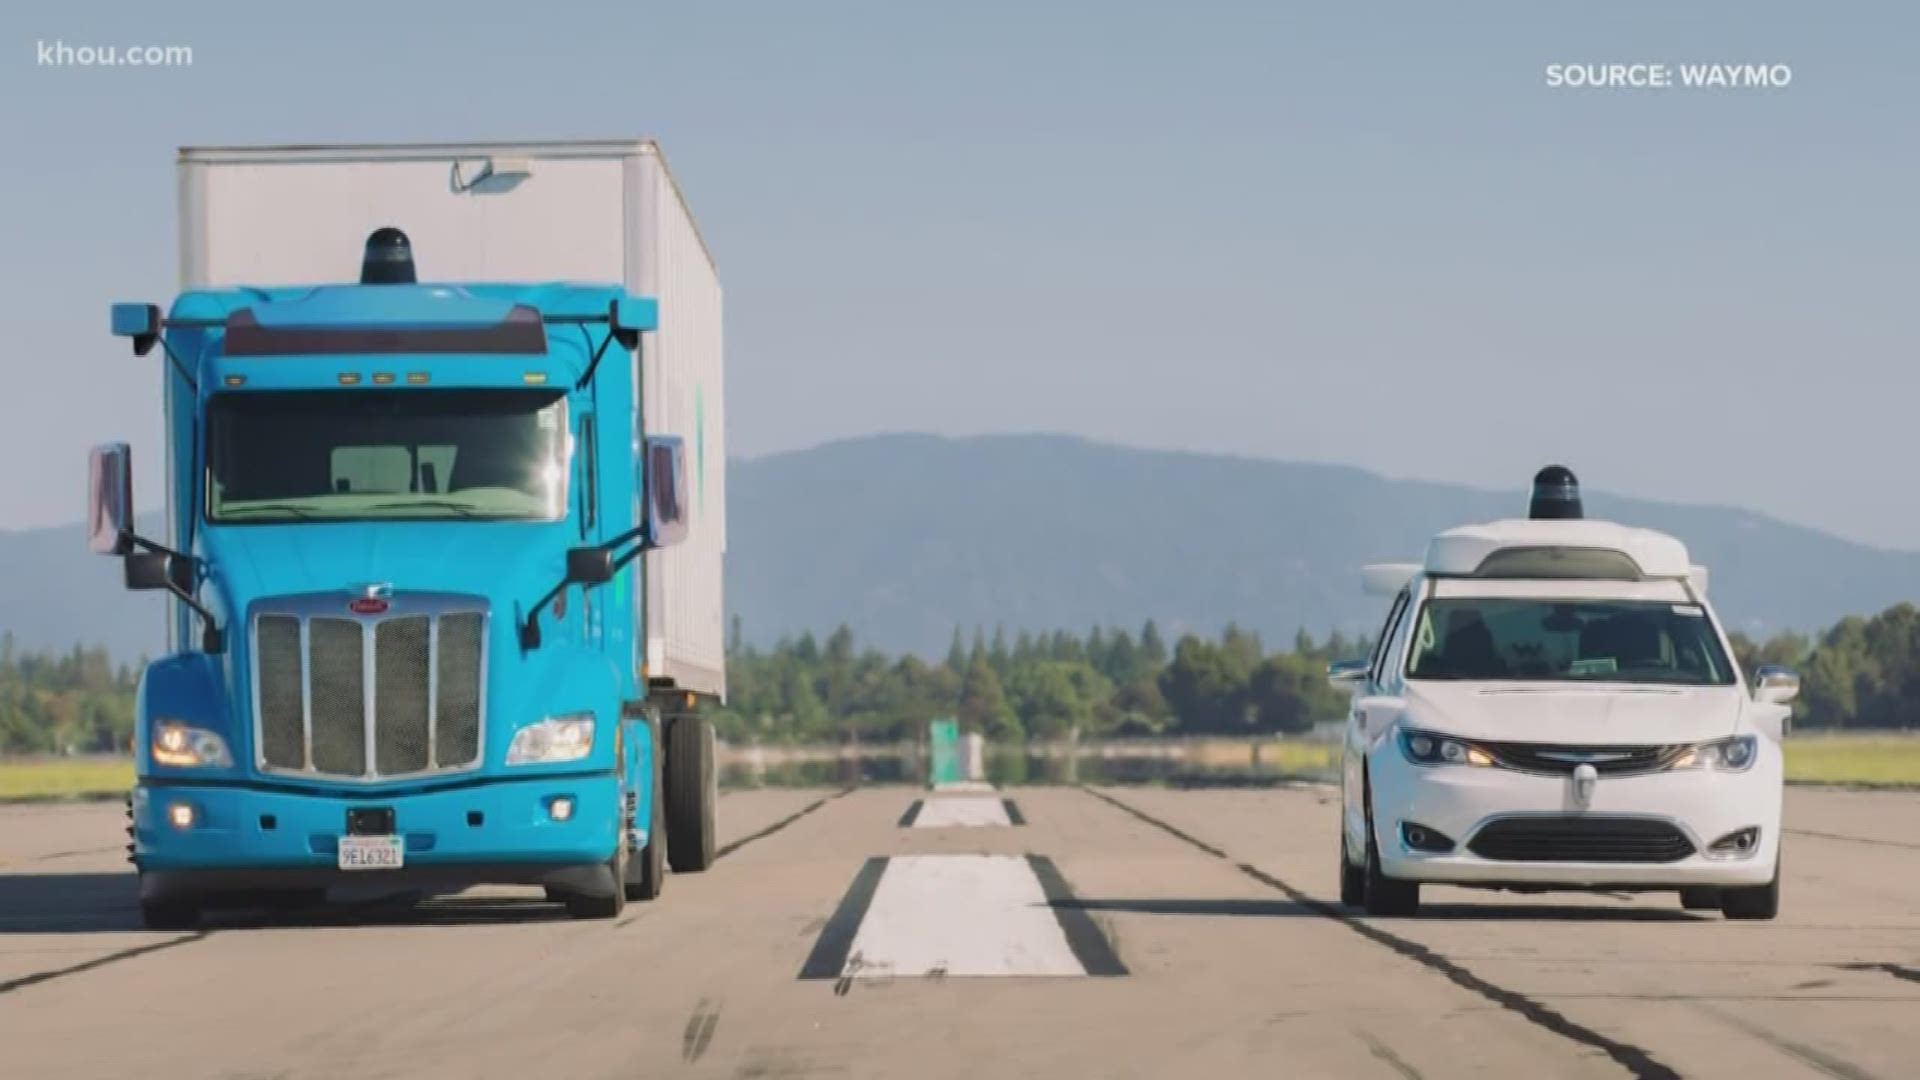 Waymo autonomous big rigs will drive interstates, mapping the promising commercial route, and exploring how its tech might create "new transportation solutions."